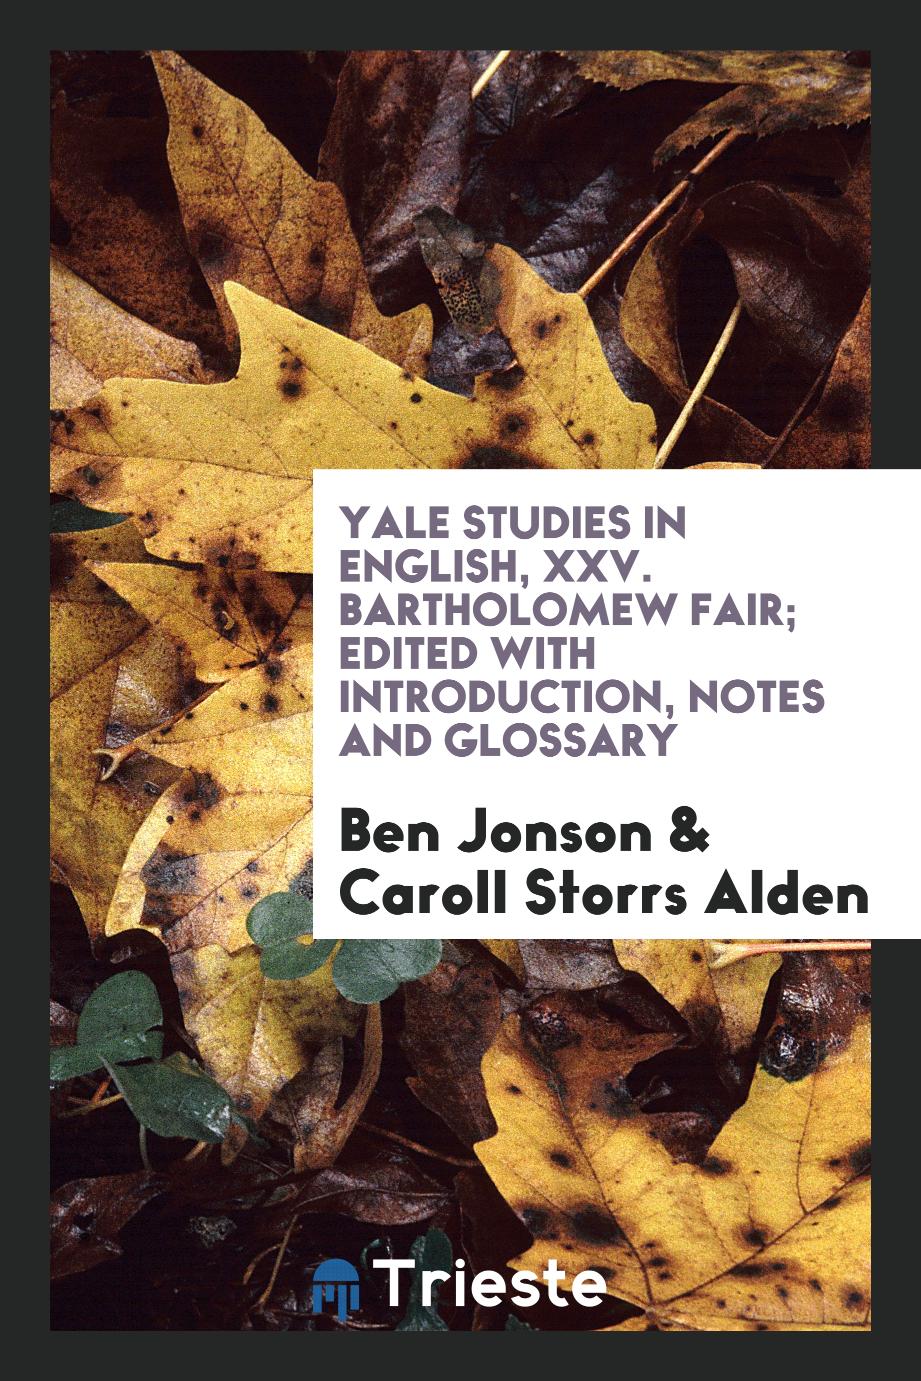 Yale Studies in English, XXV. Bartholomew Fair; Edited with Introduction, Notes and Glossary